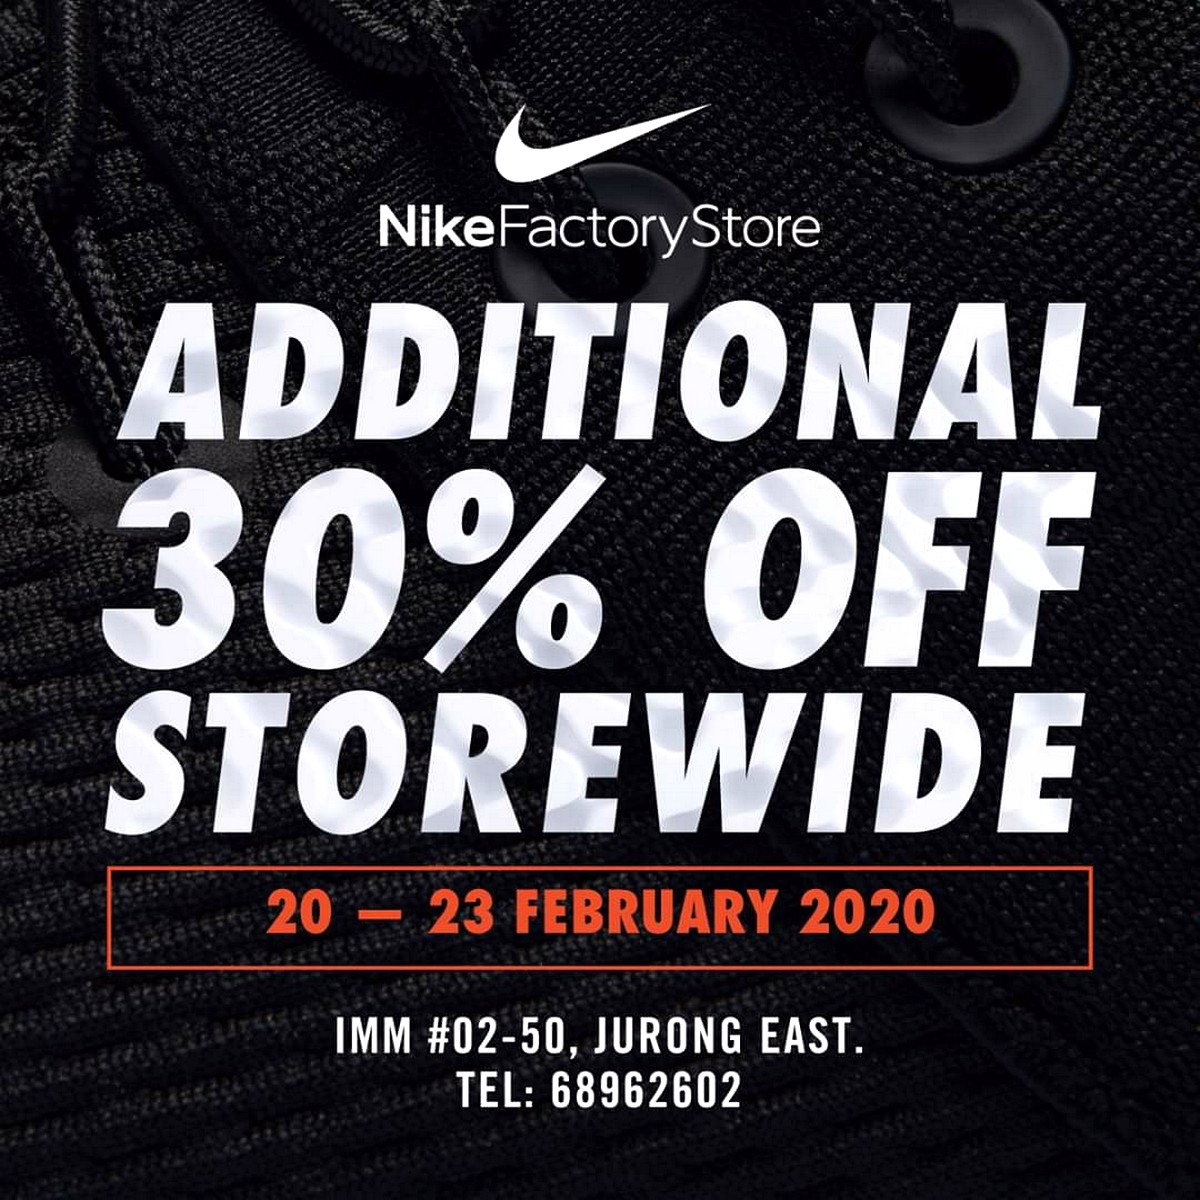 Nike-Warehouse-Sale-2020-Singapore-Clearance-2021-Factory-Outlet-Store-Discounts-Storewide 20-23 Feb 2020: Nike Factory Store 4 Days Crazy Sale! Storewide Additional 30% Off!